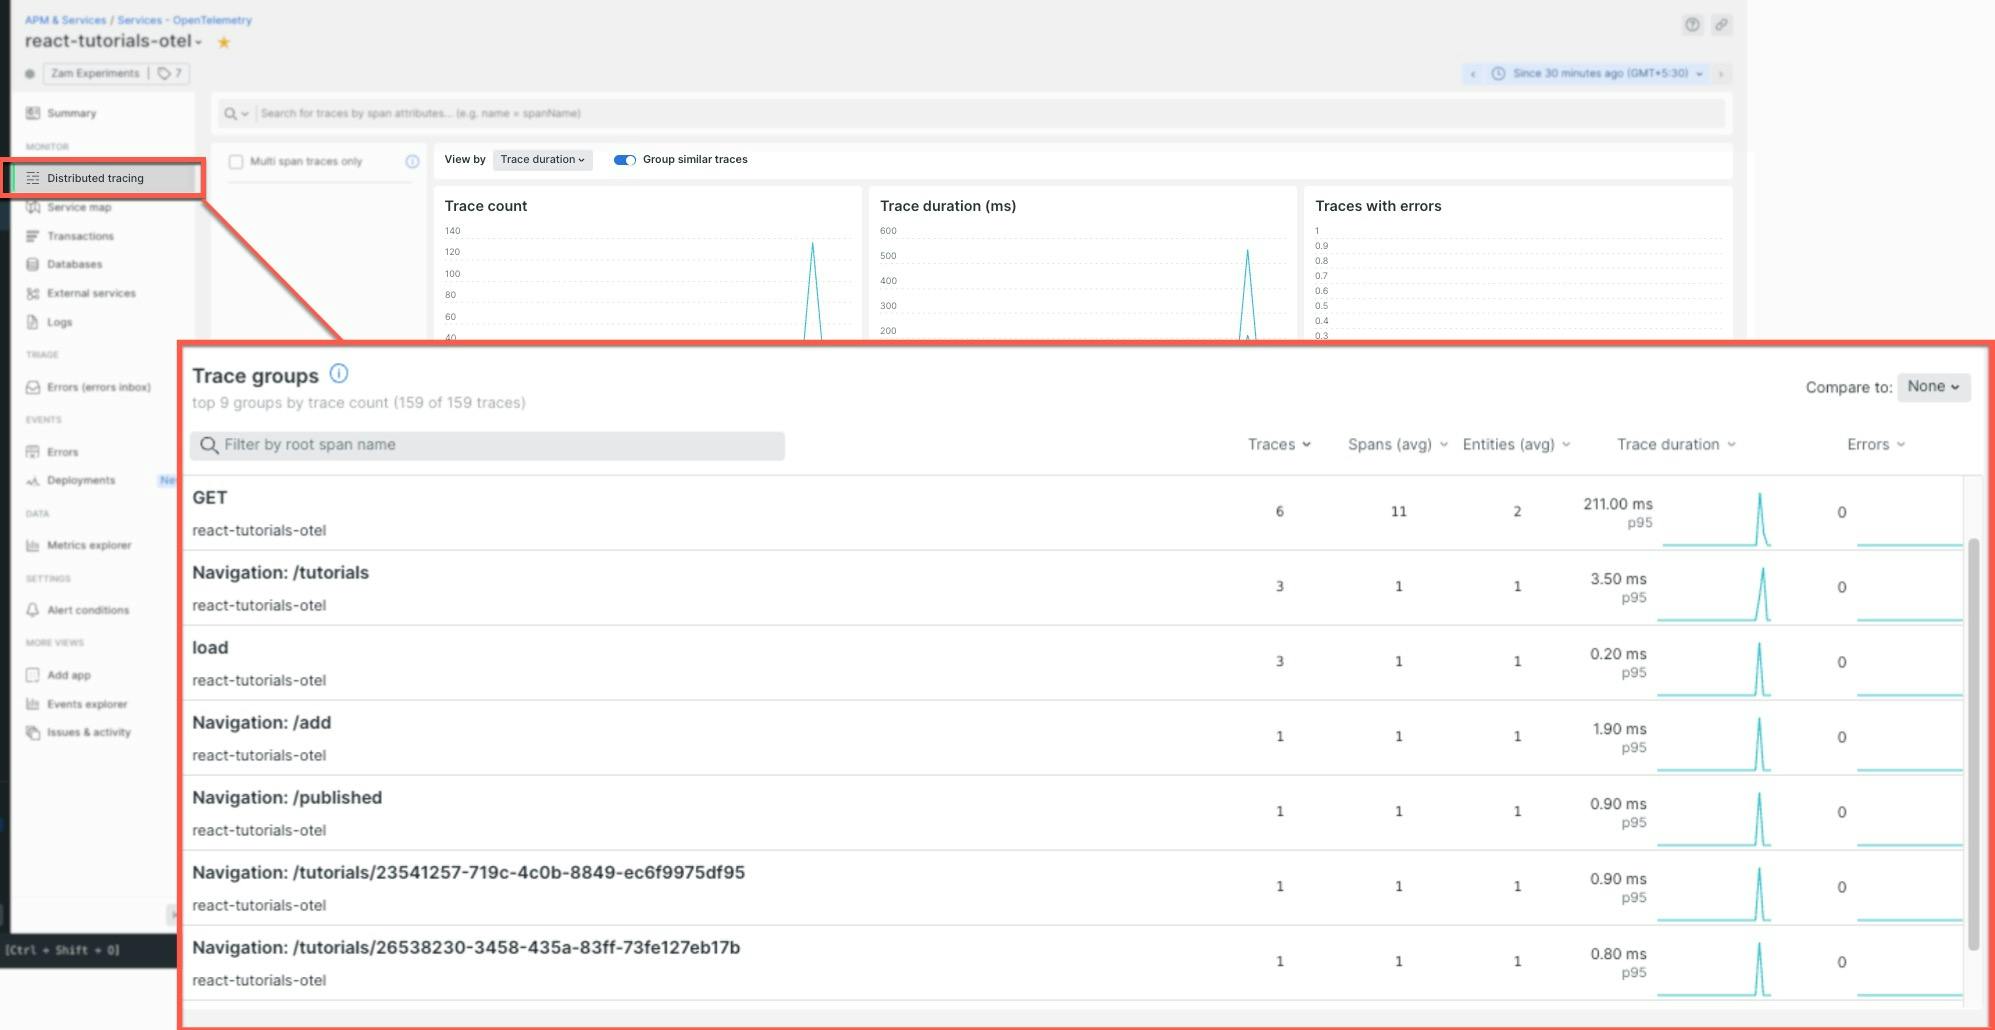 Screenshot of APM & services > Service Name > Distributed tracing in New Relic